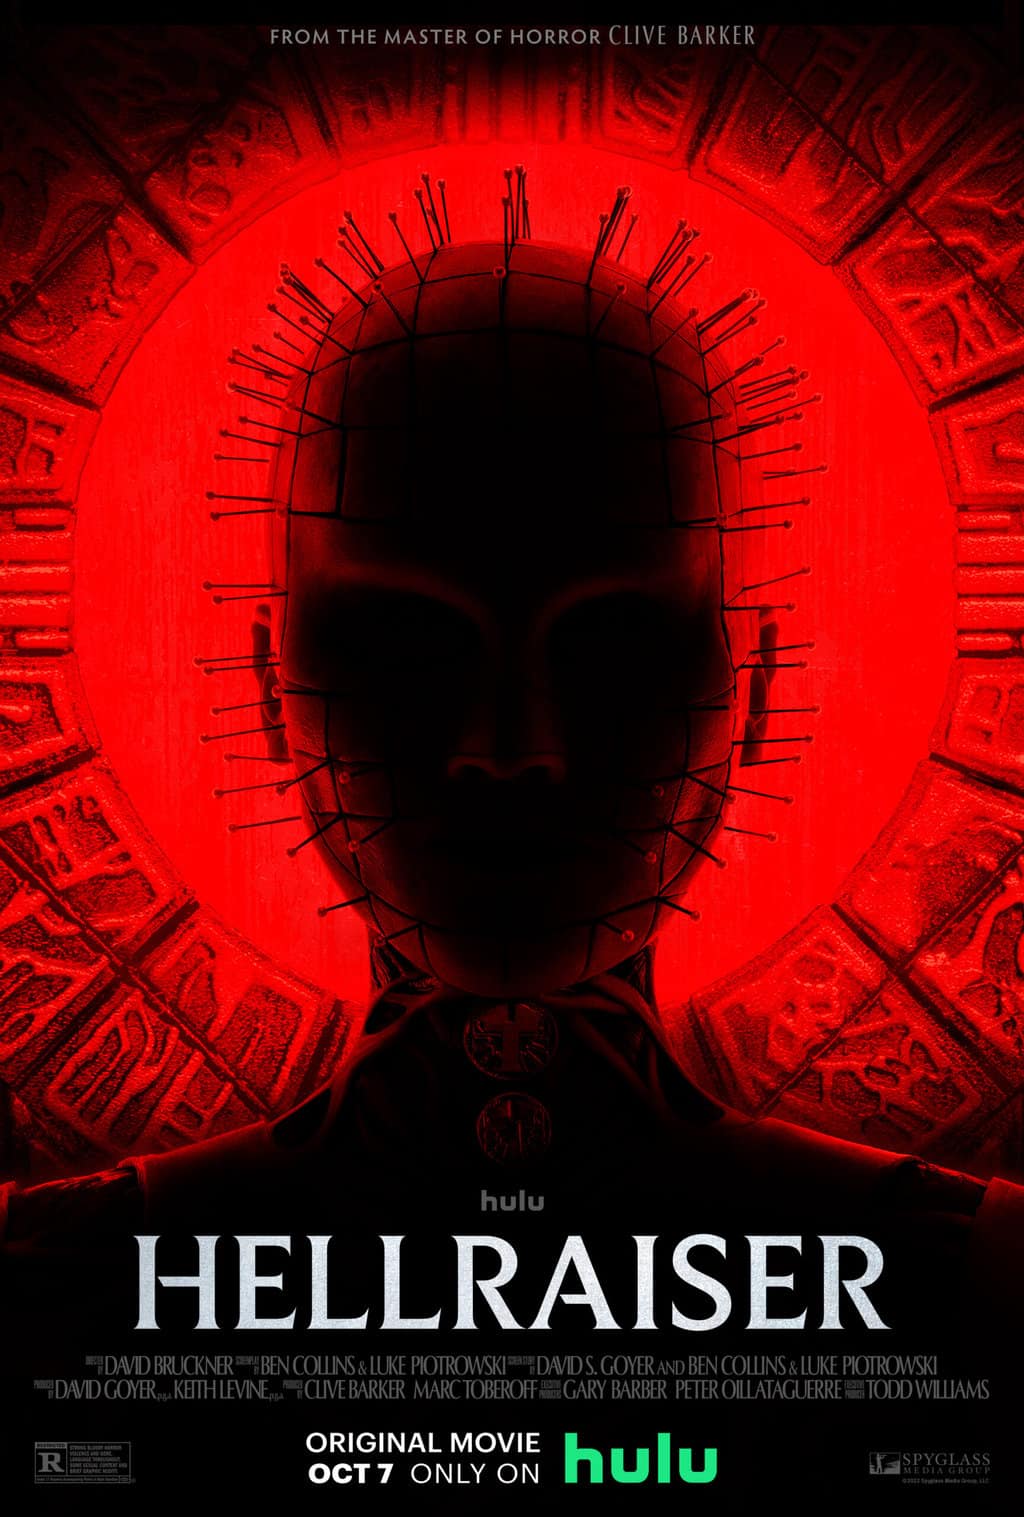 HELLRAISER parents guide and age rating.